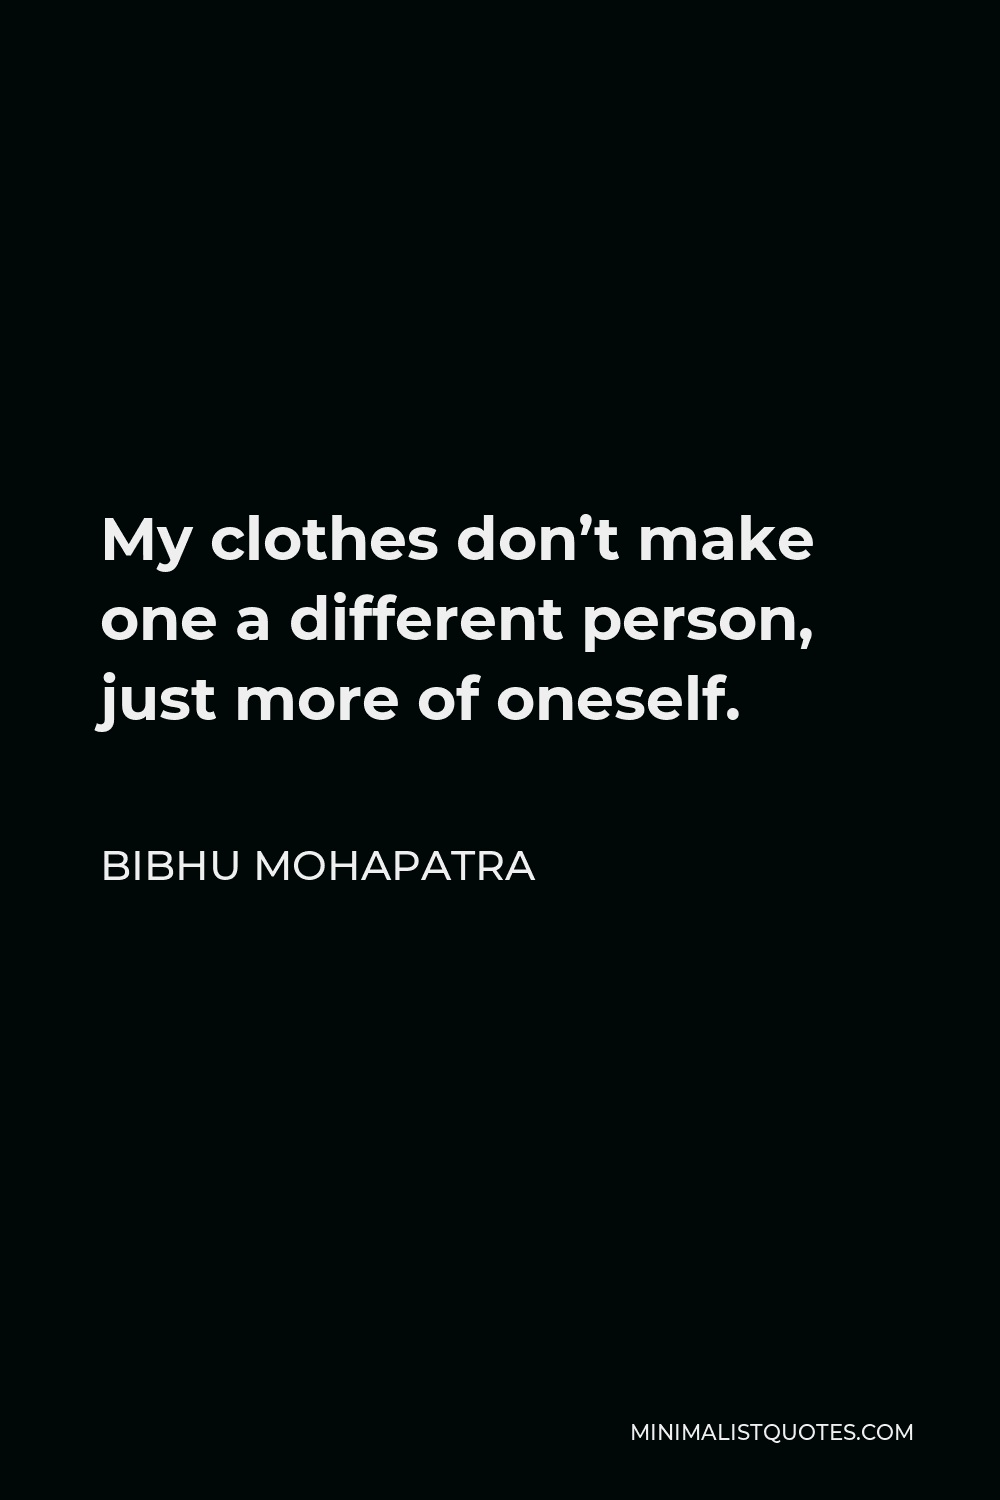 Bibhu Mohapatra Quote - My clothes don’t make one a different person, just more of oneself.